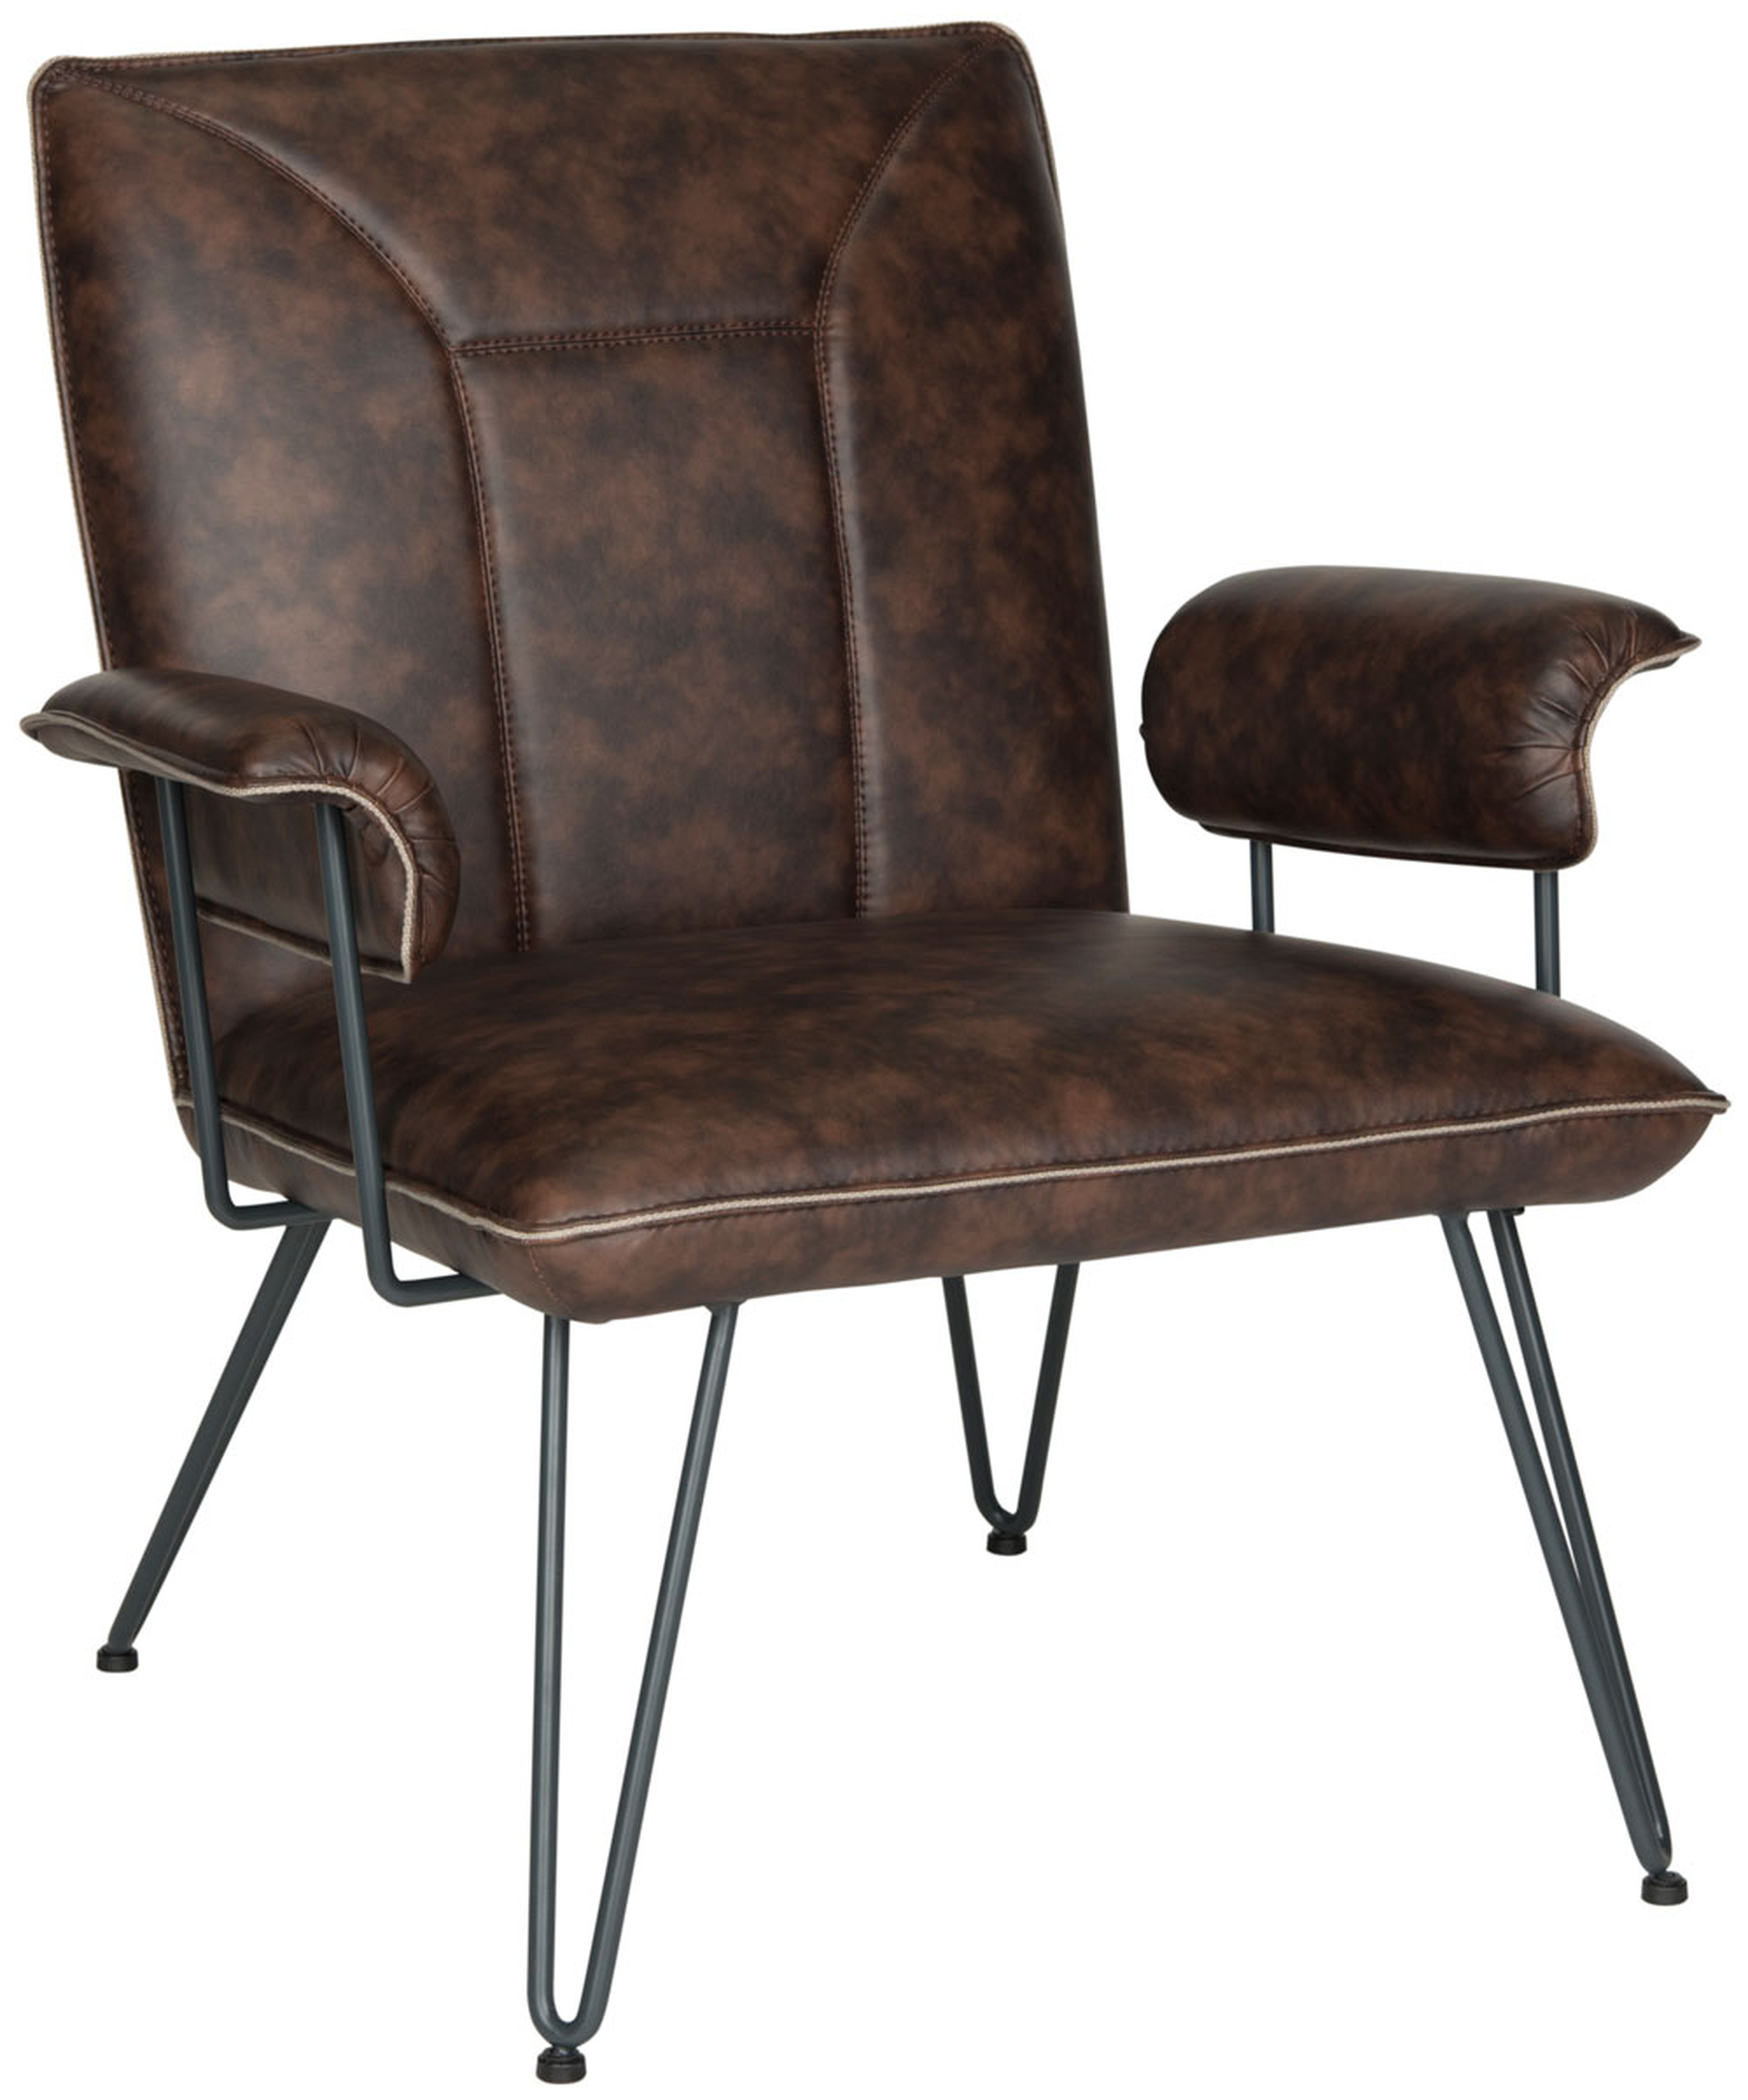 Johannes 17.3"H Mid Century Modern Leather Arm Chair - Antique Brown/Black - Arlo Home - Arlo Home